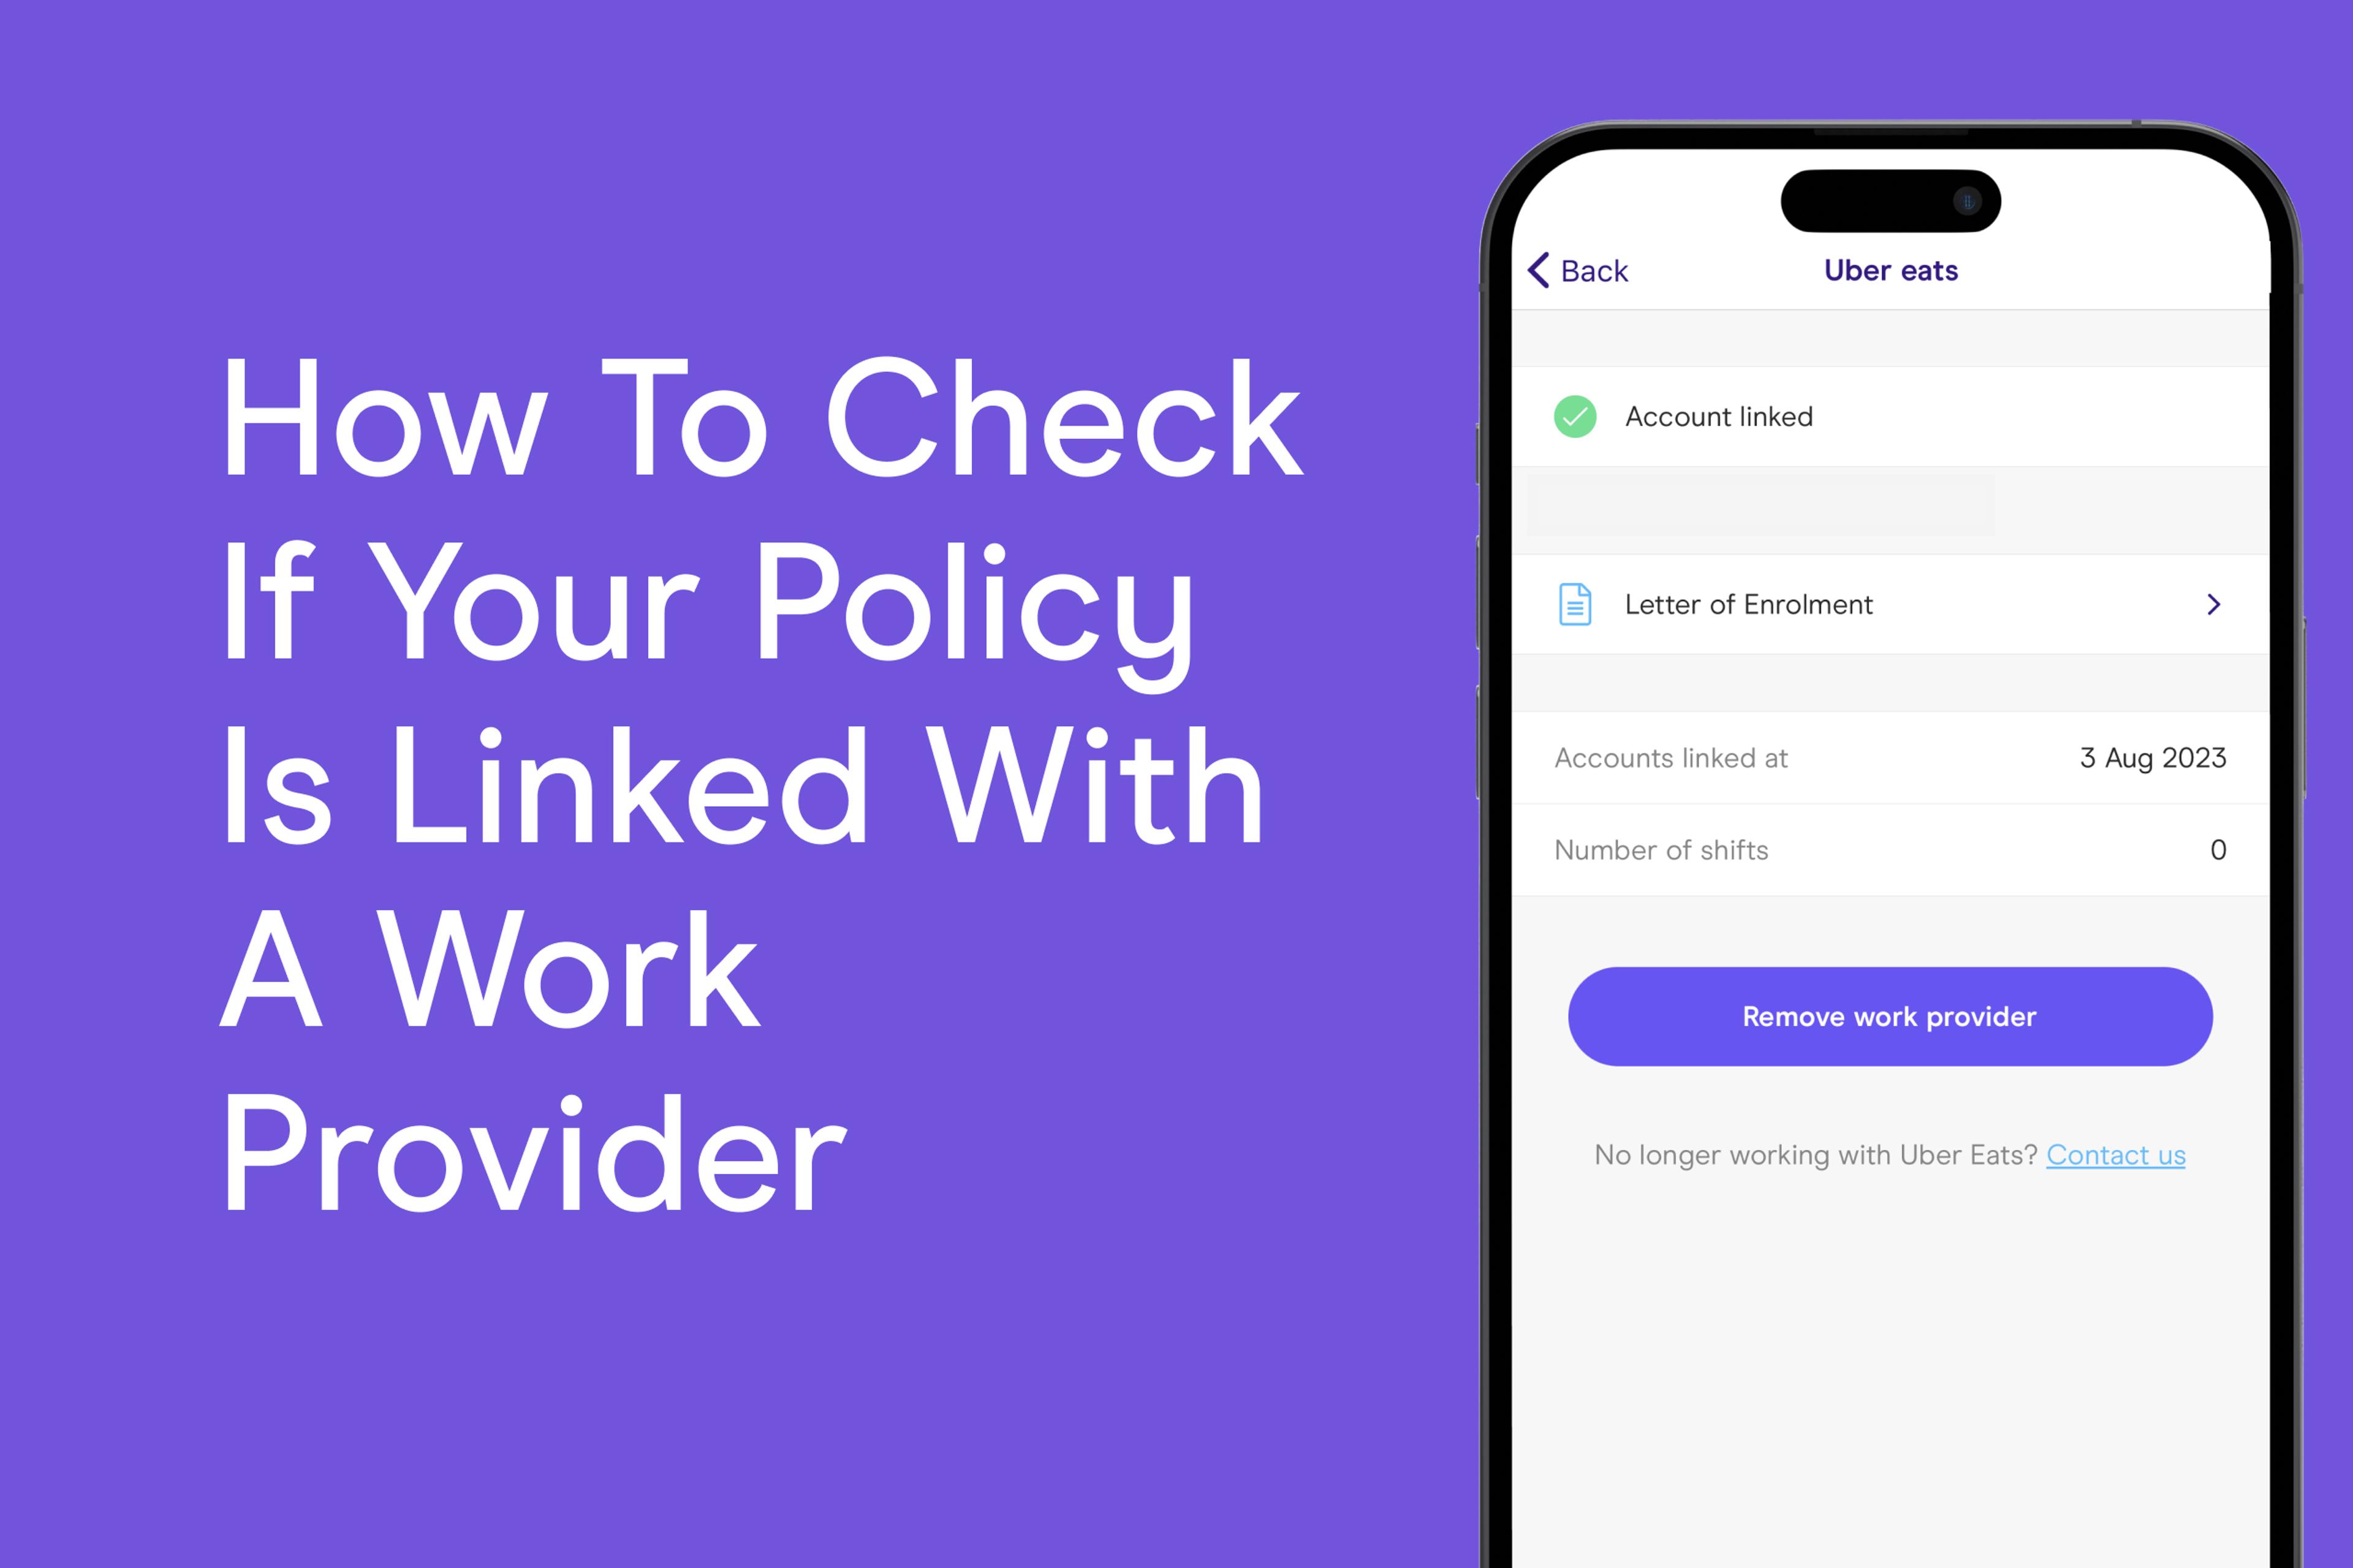 How to check if your policy is linked with a work provider